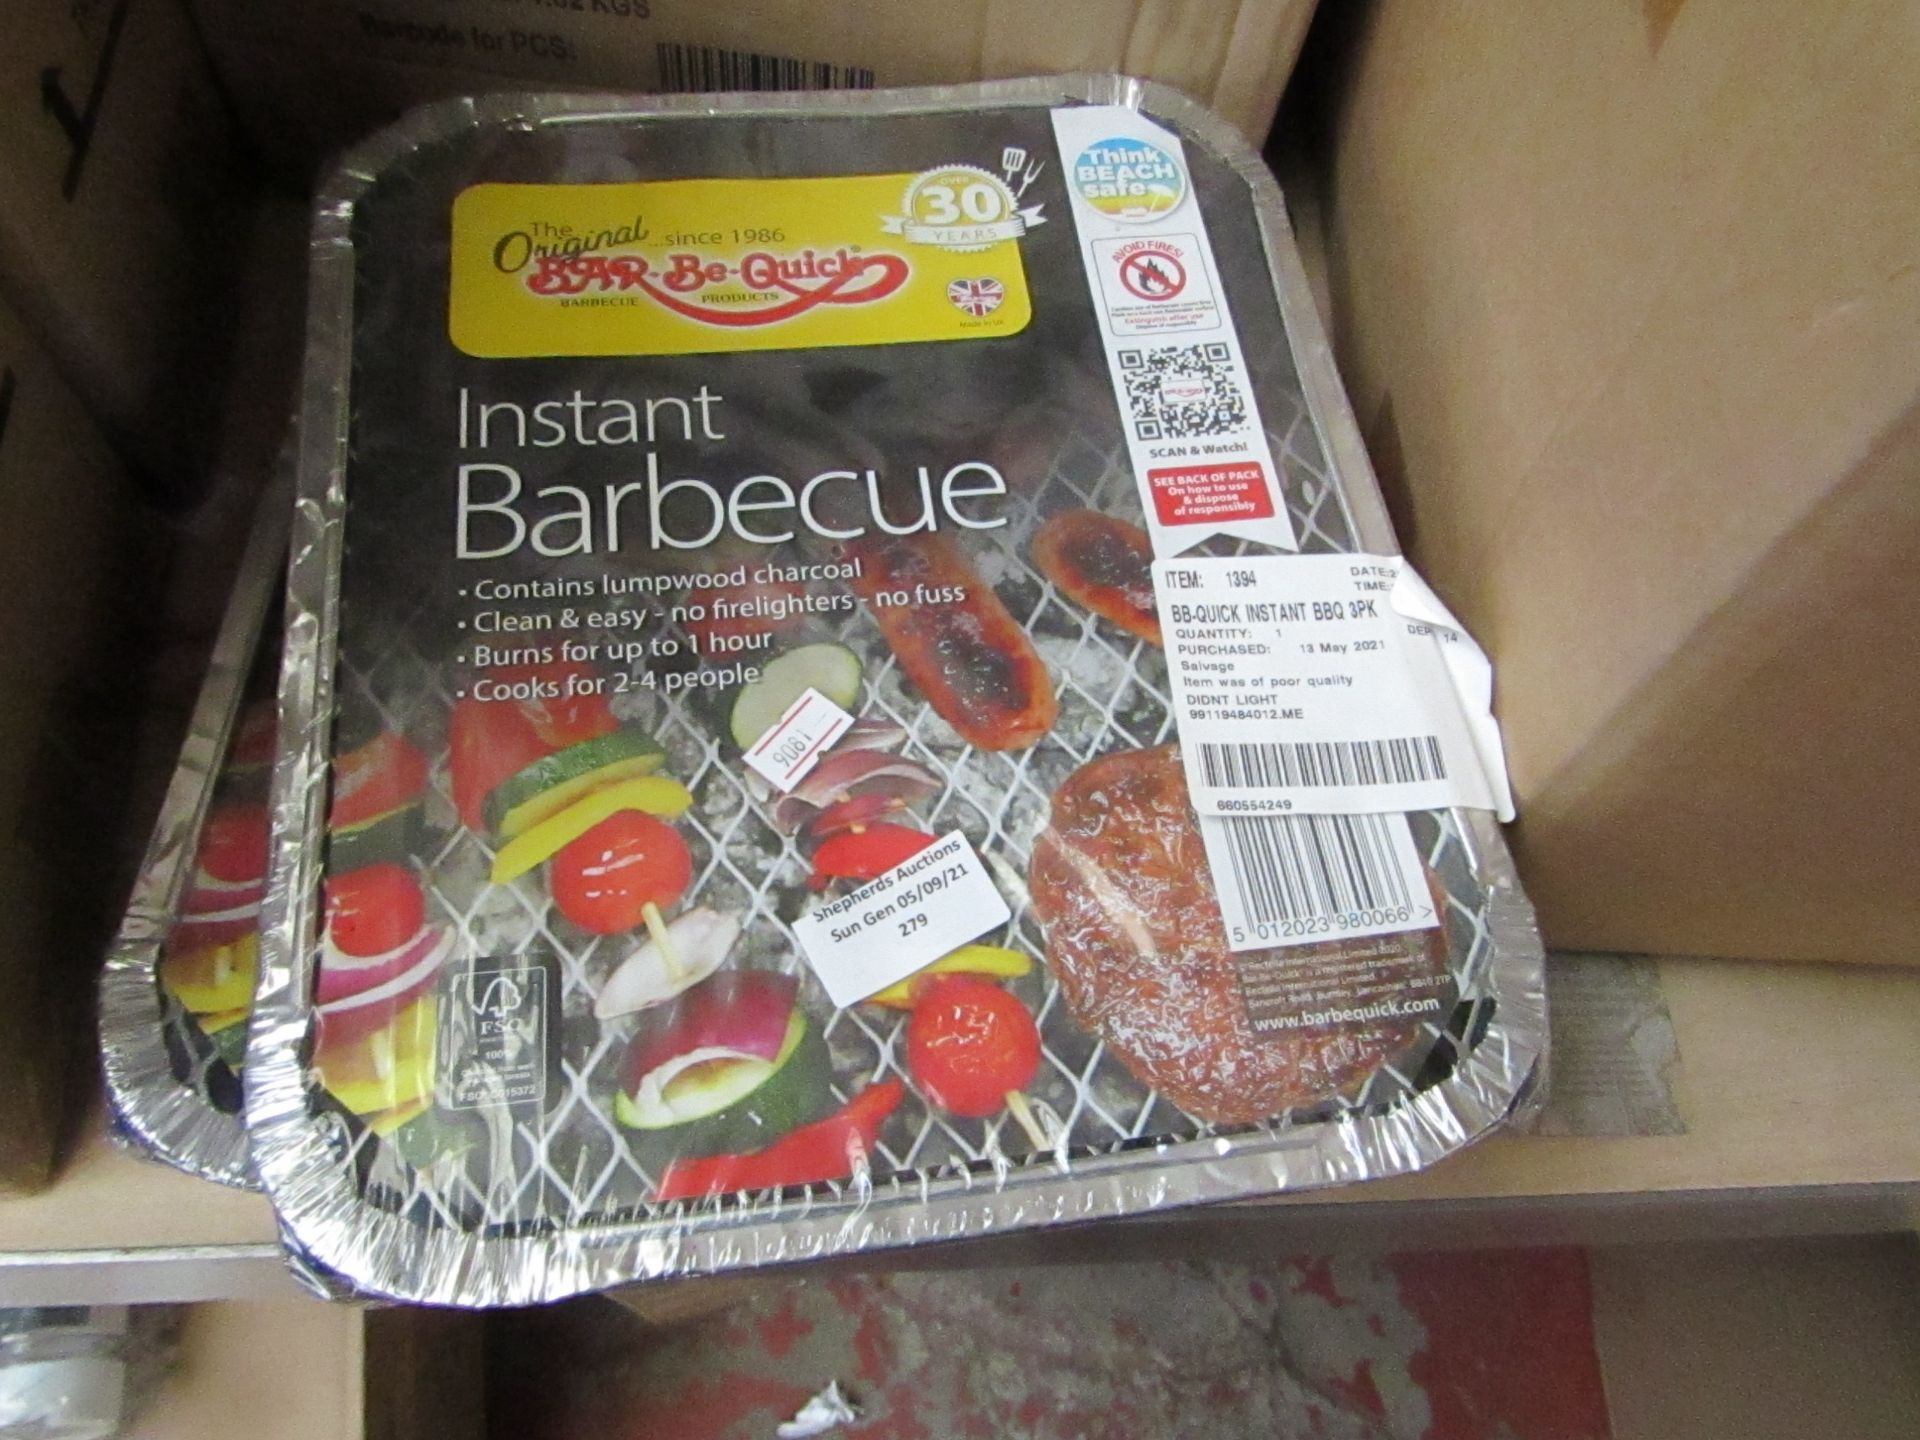 2x The Original - Instant BBQ - Unused & Packaged.